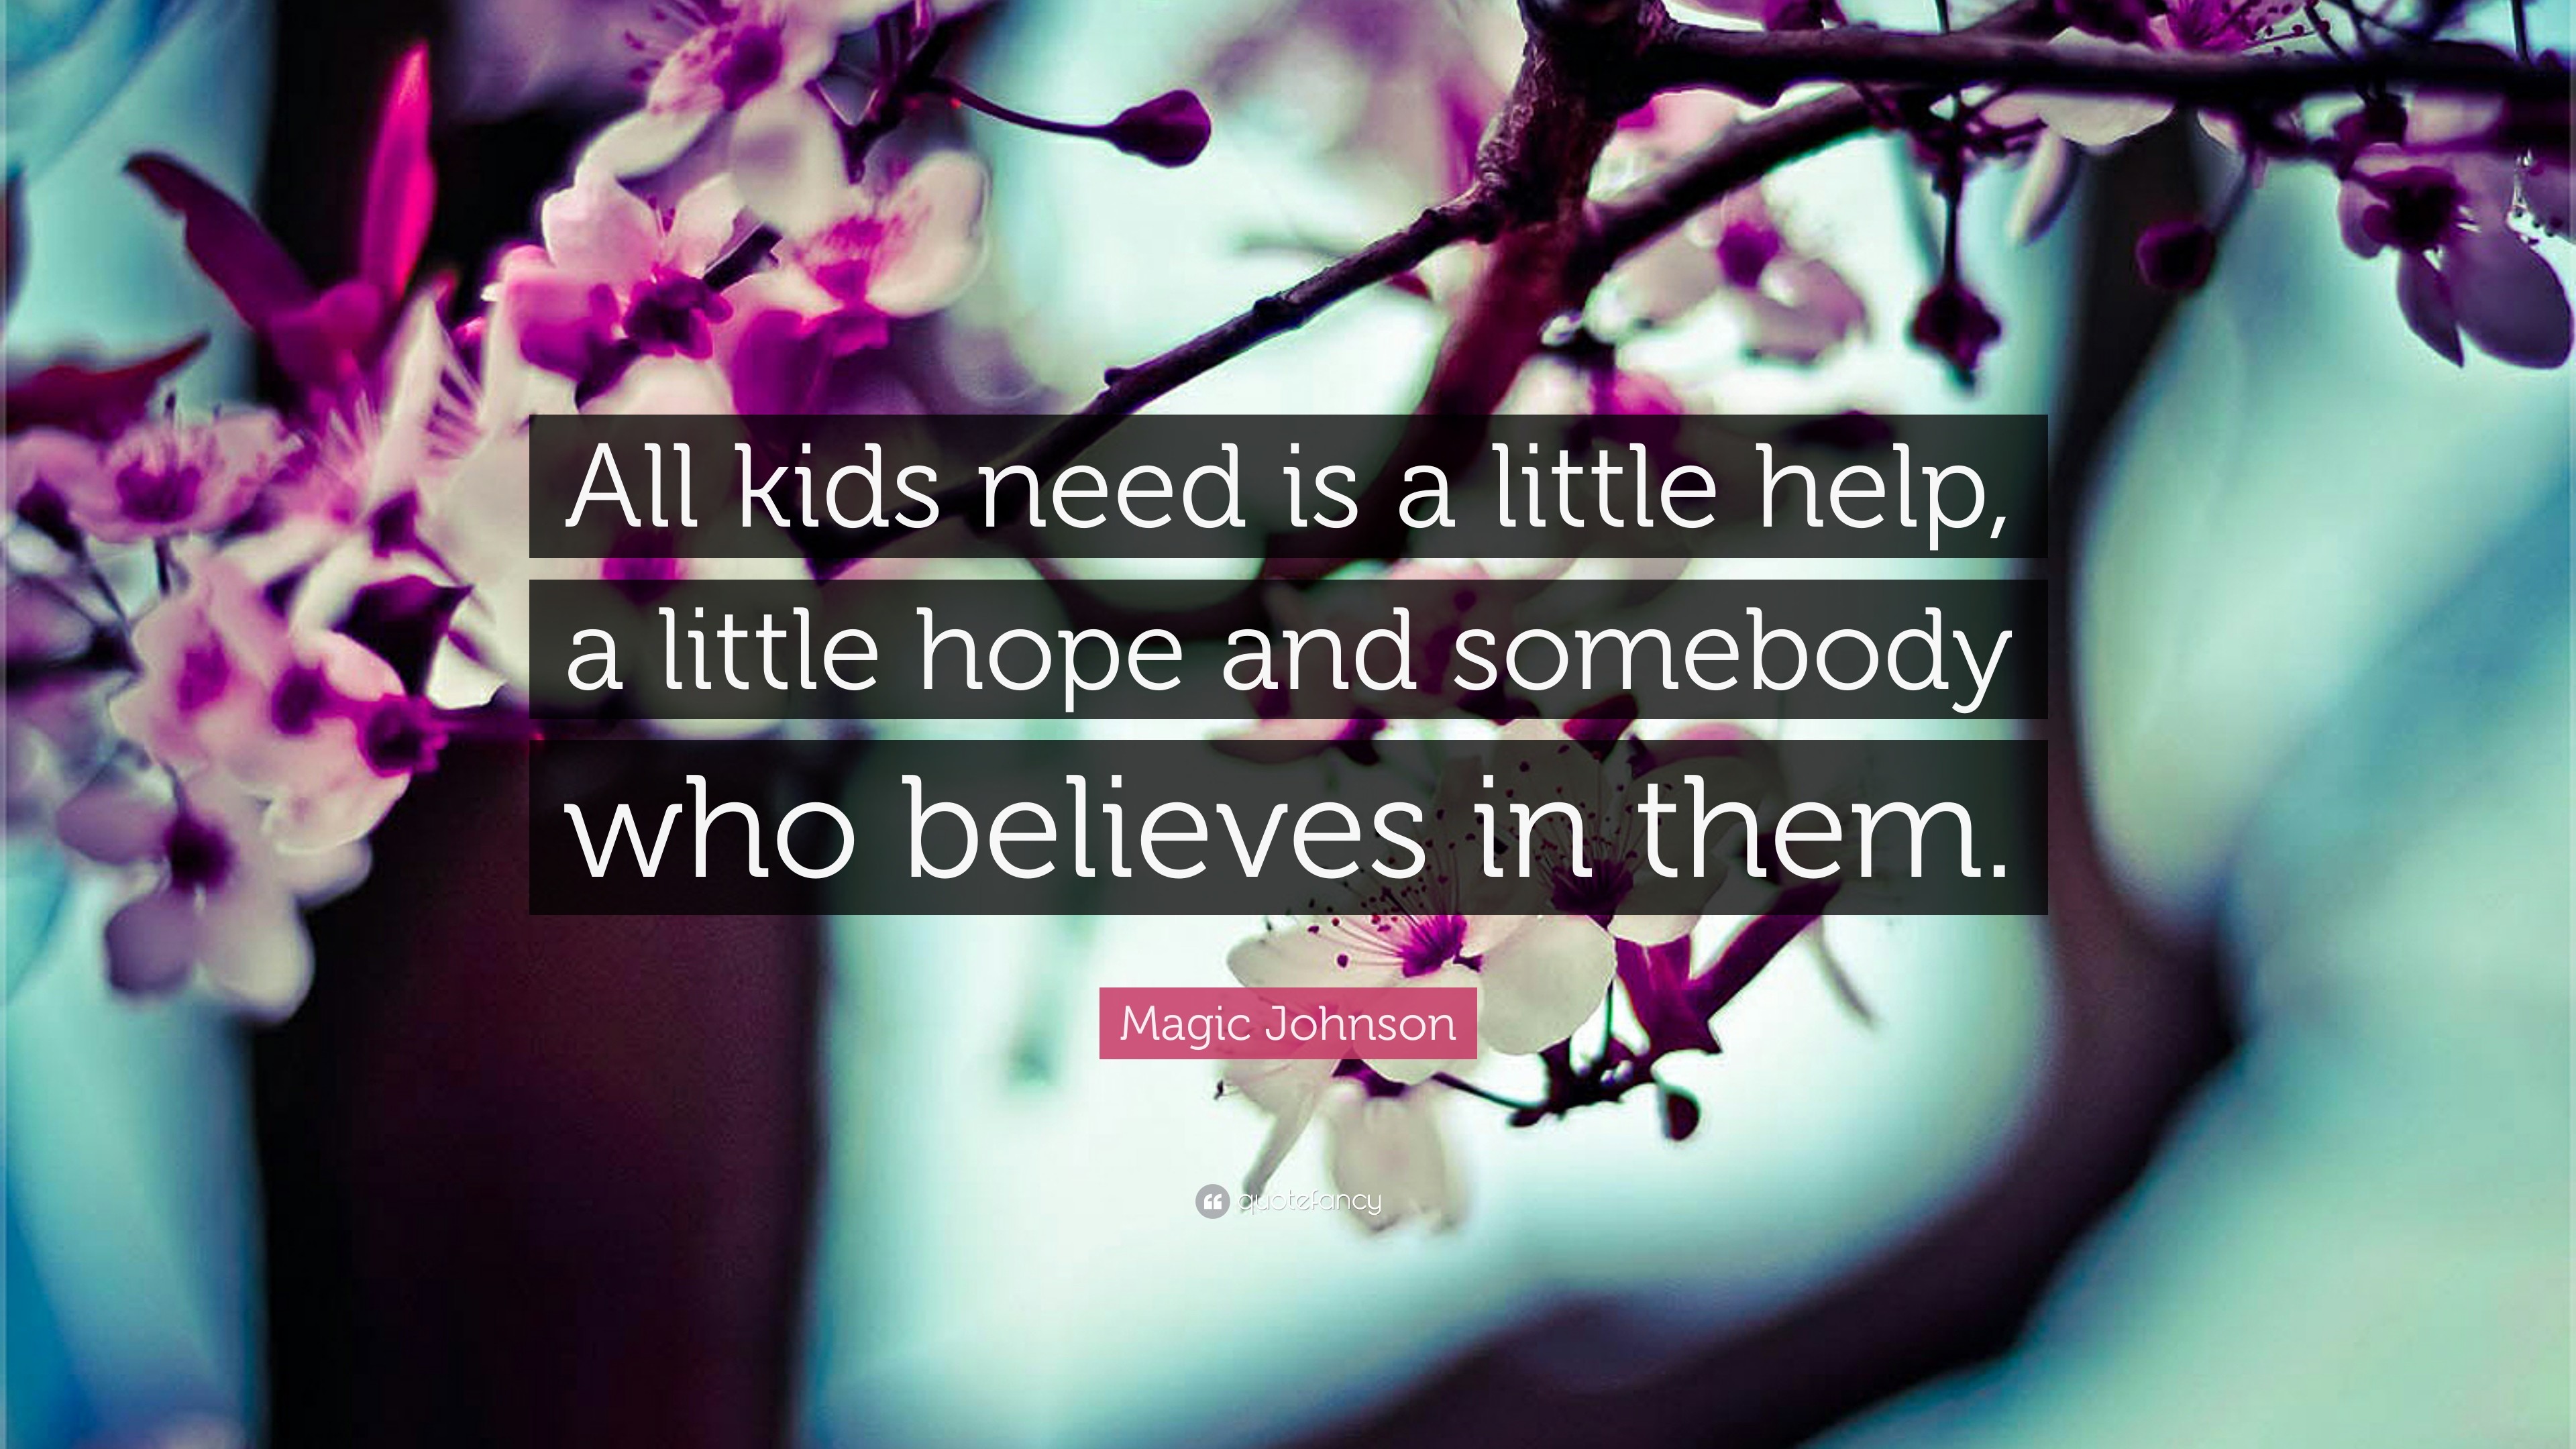 3840x2160 Magic Johnson Quote: “All kids need is a little help, a little hope